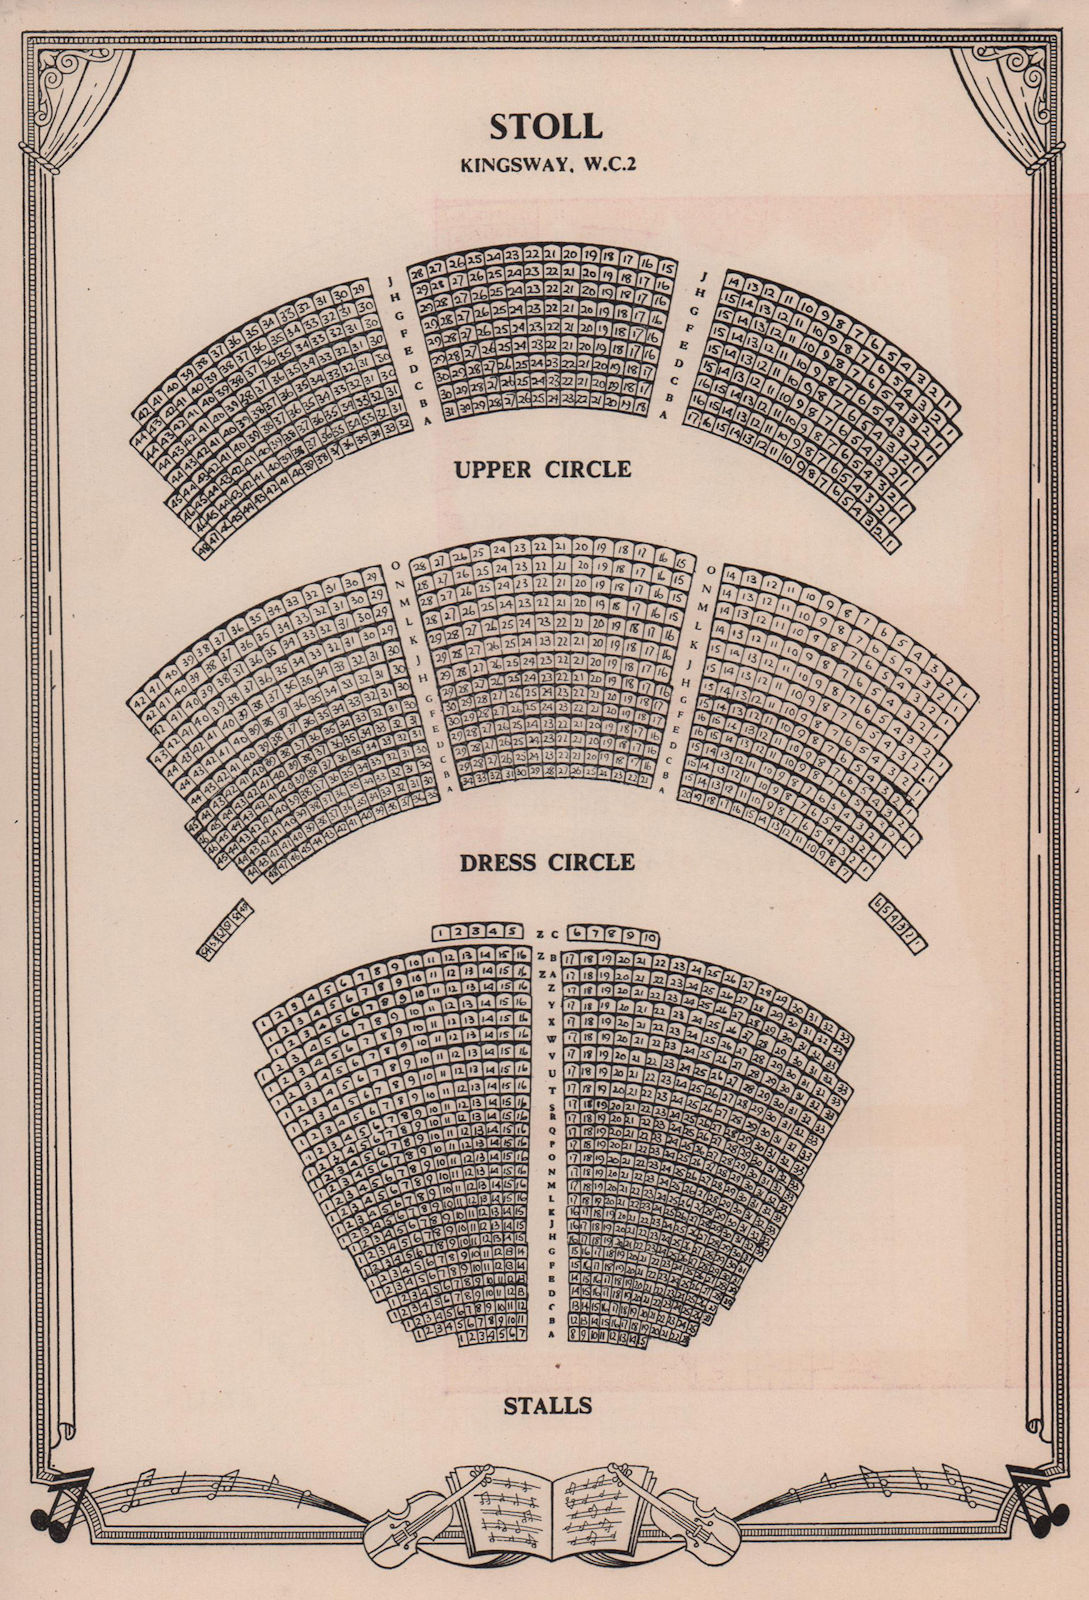 Stoll (now Peacock) Theatre, Kingsway, London. Vintage seating plan 1955 print